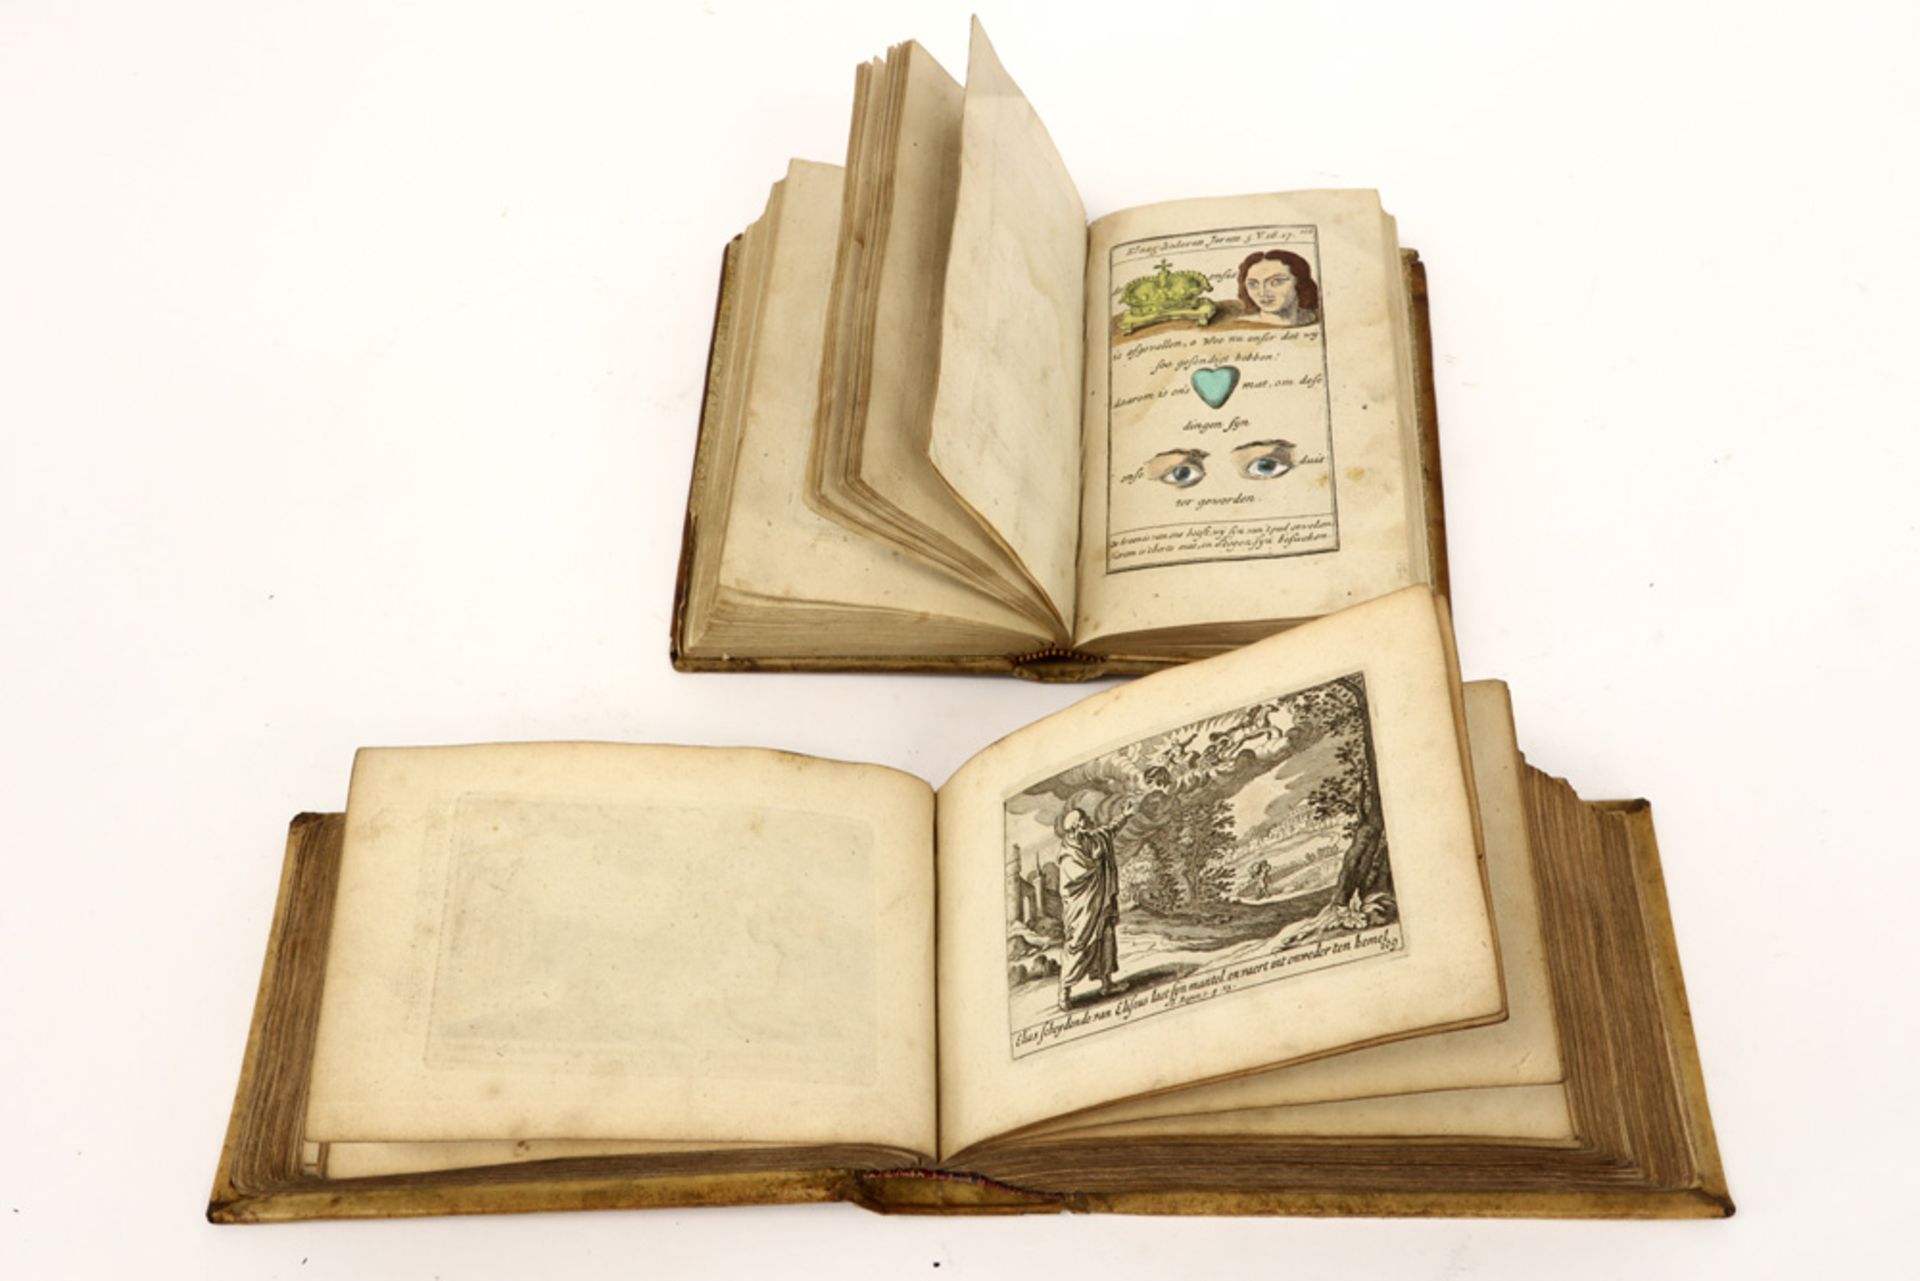 lot of two antique picture Bibles: - one published by Nicolaes Visscher with 144 (?) numbered - Image 6 of 6